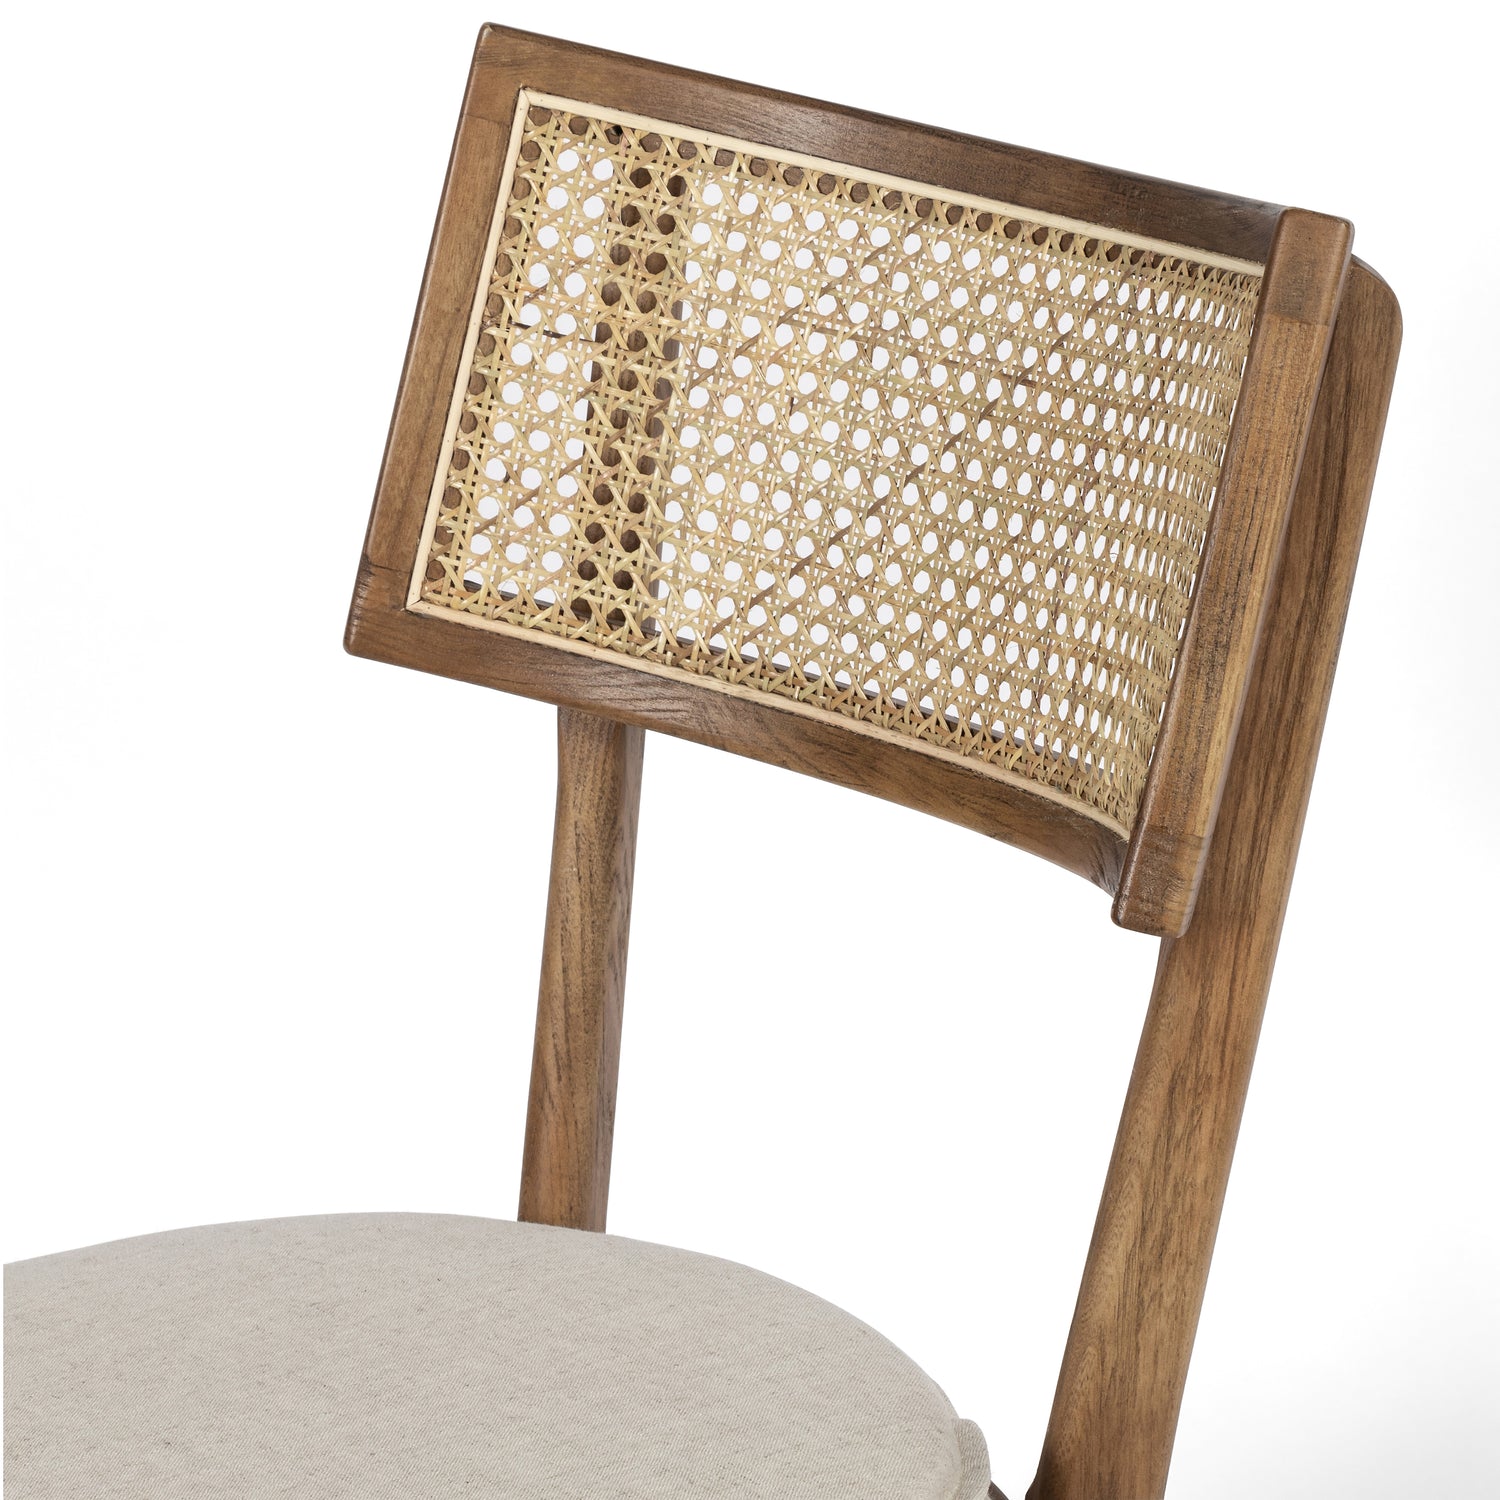 Savile Flax Fabric and Toasted Nettlewood with Natural Cane | Britt Dining Chair | Valley Ridge Furniture